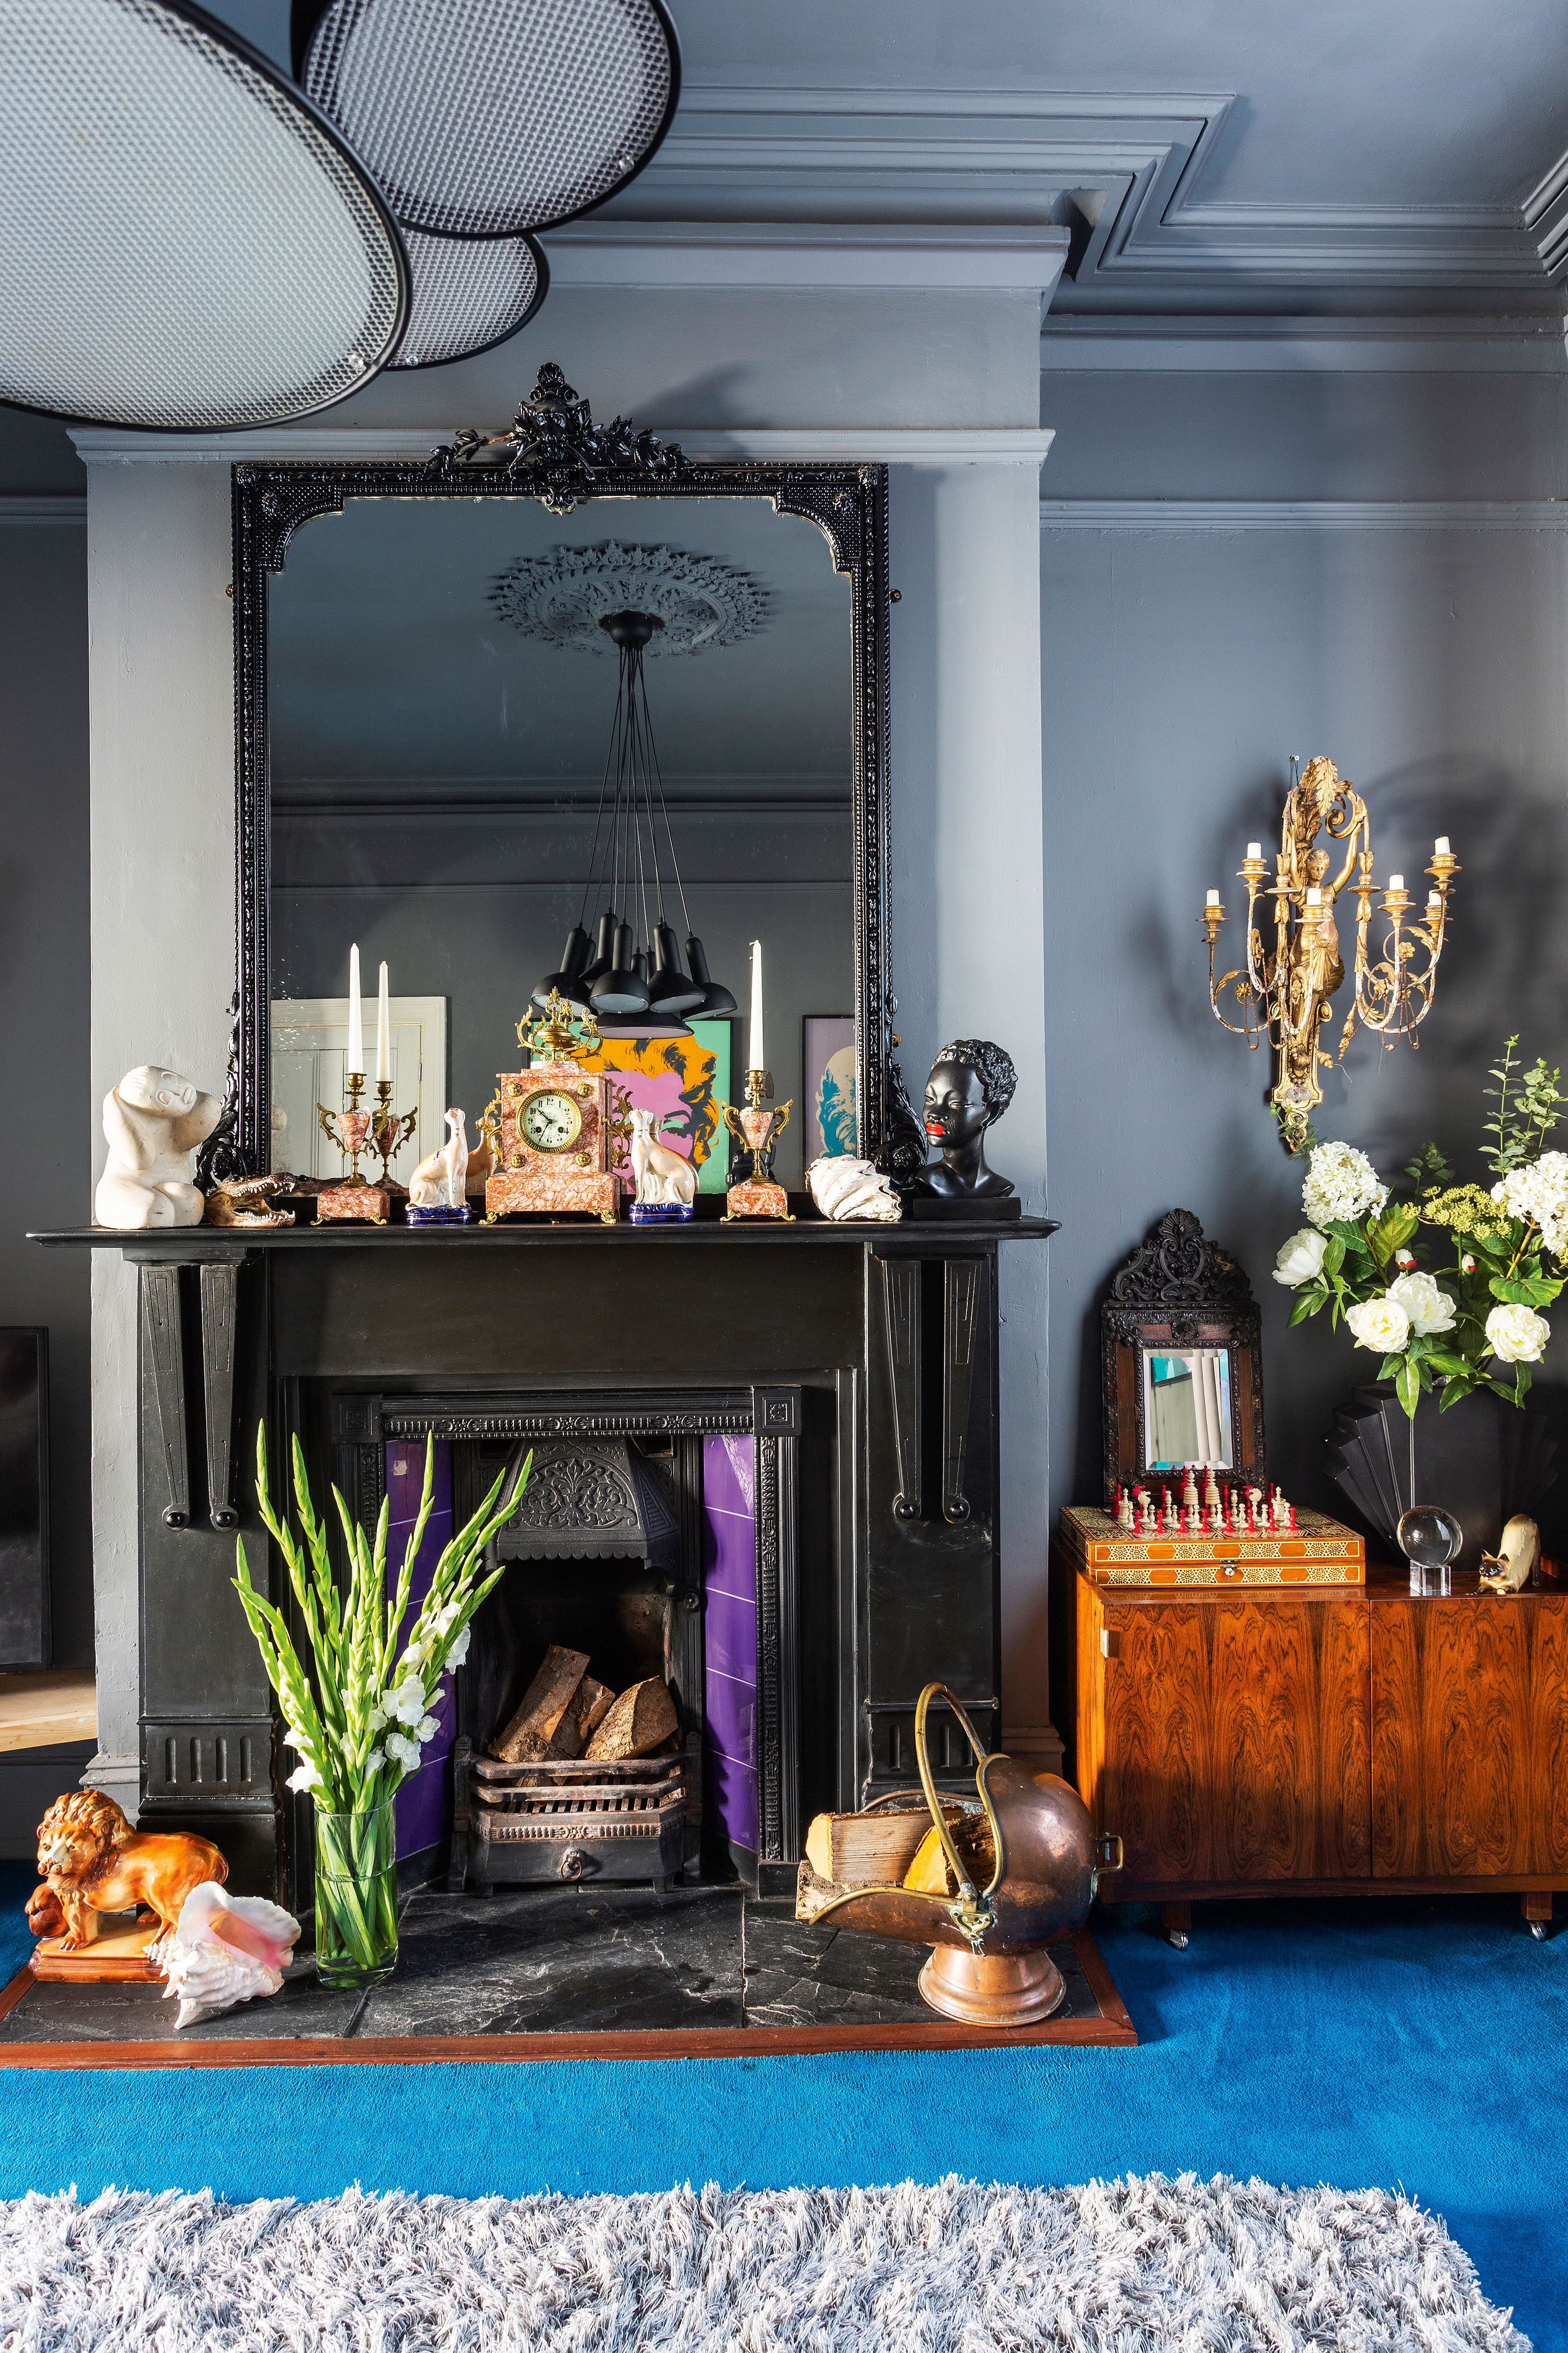 A grey living room with bright blue carpet, traditional black fireplace and large black framed mirror with chandelier ceiling light in reflection